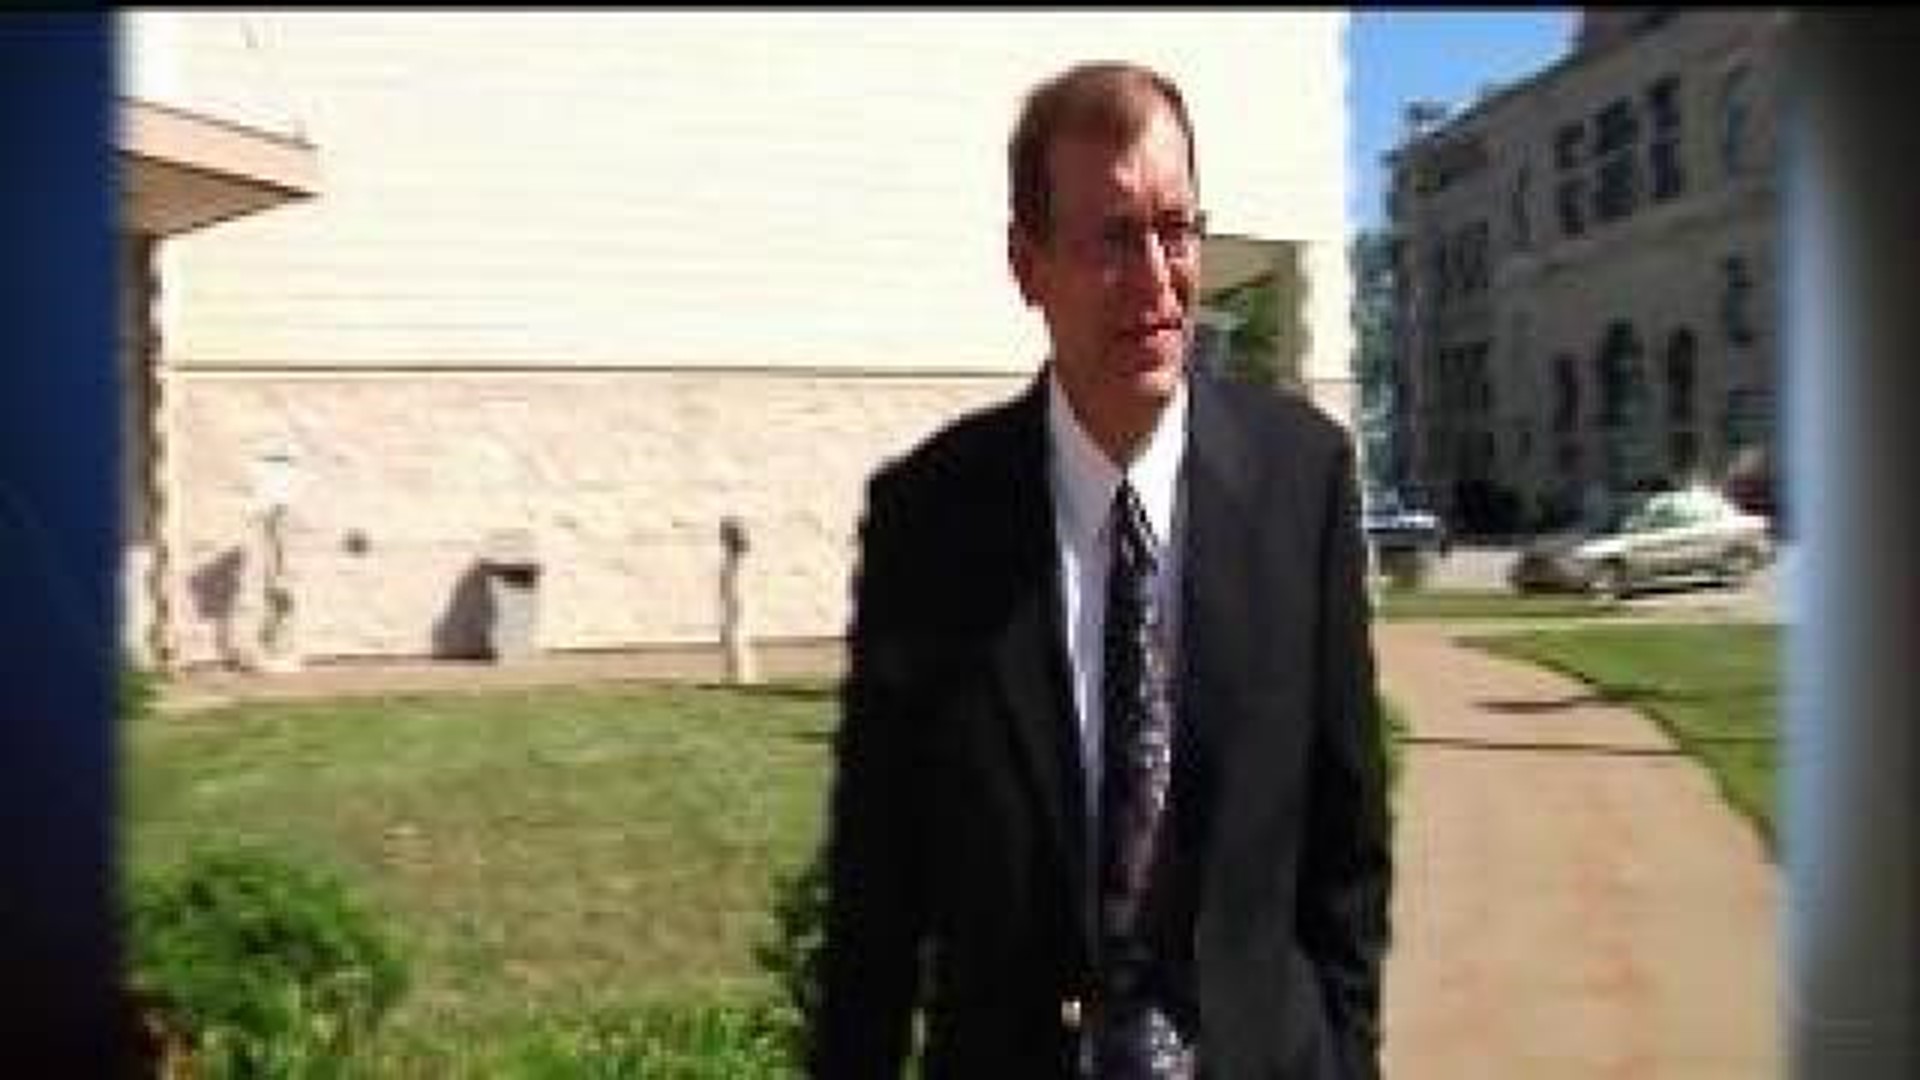 Mike Bertelsen pleads guilty and resigns